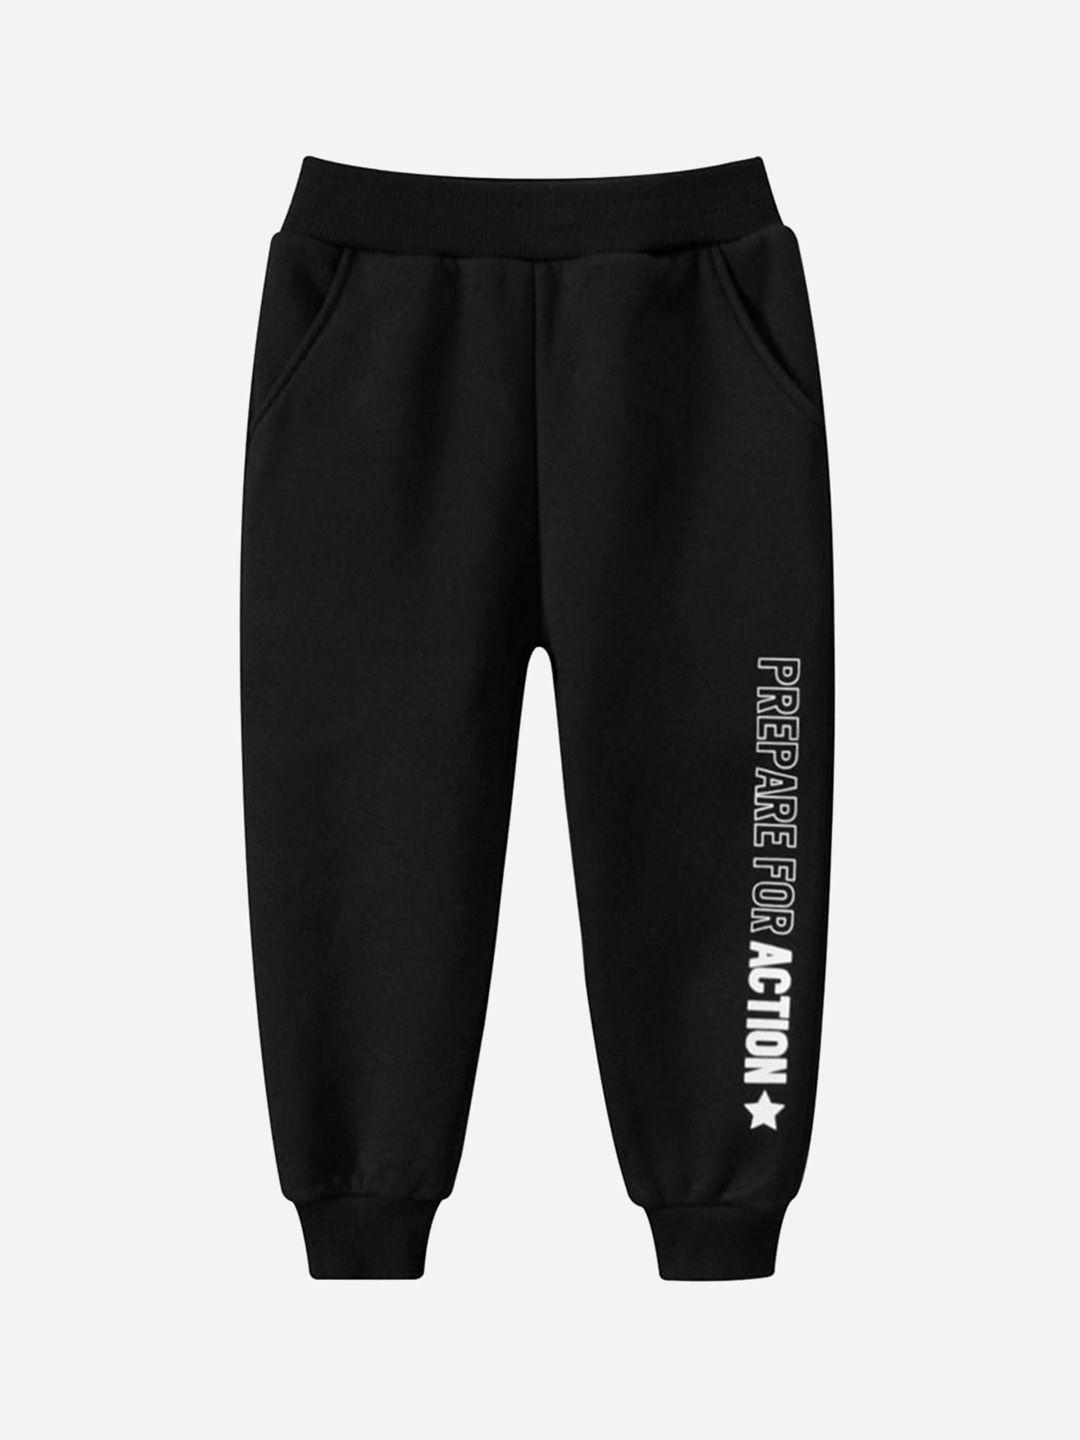 stylecast-boys-black-typography-printed-slim-fit-easy-wash-joggers